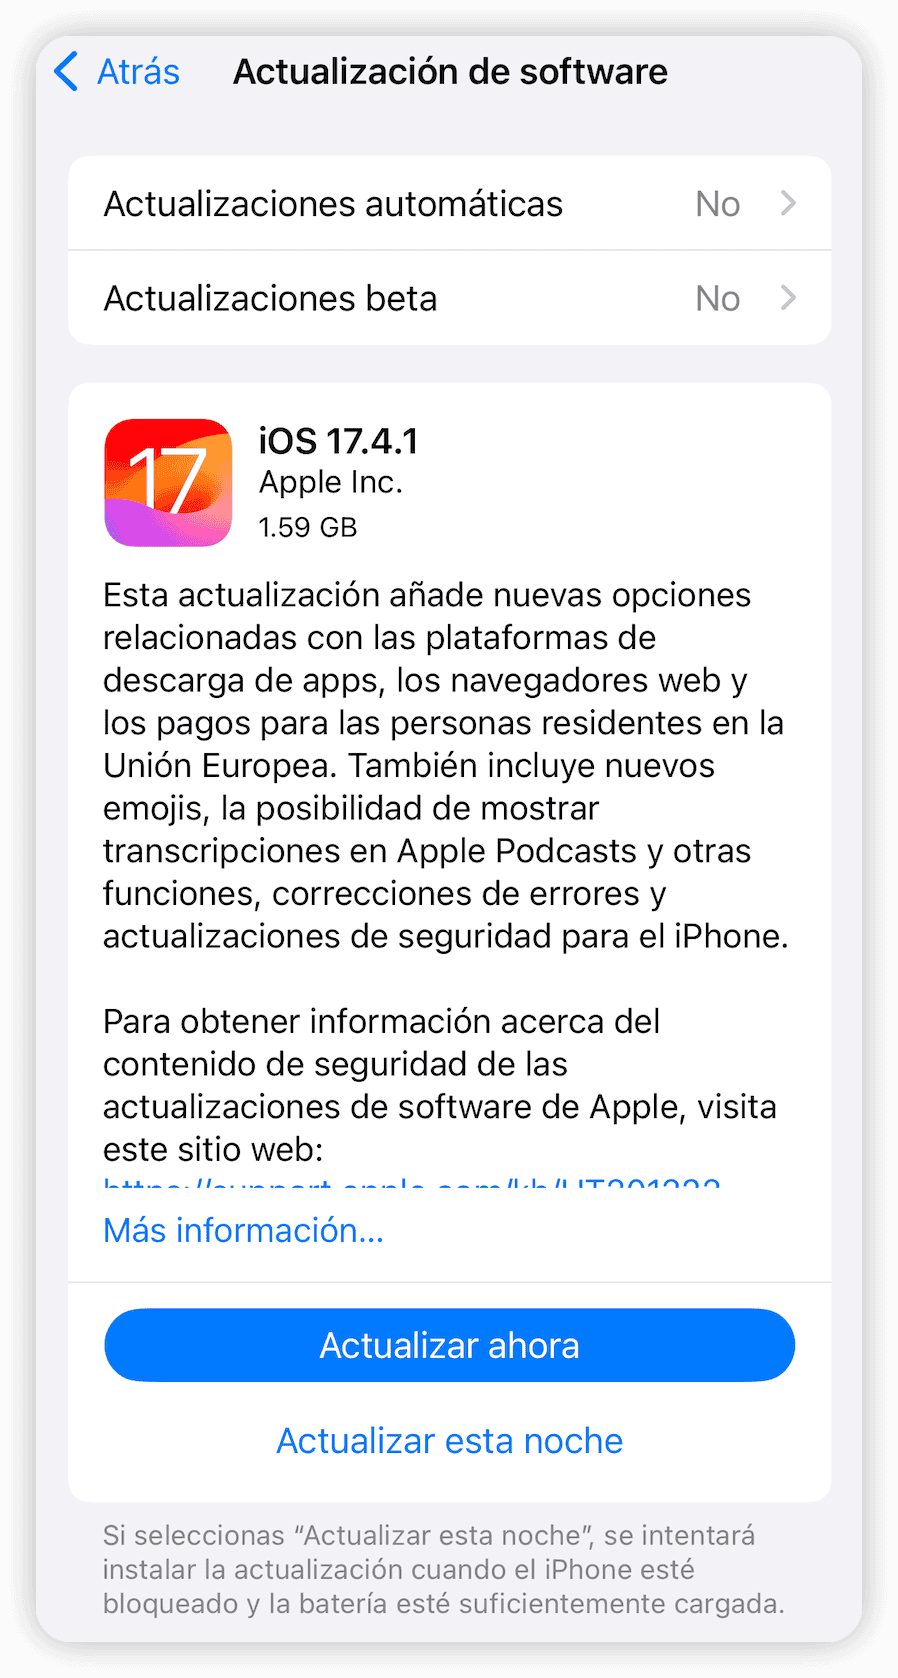 Update your iPhone